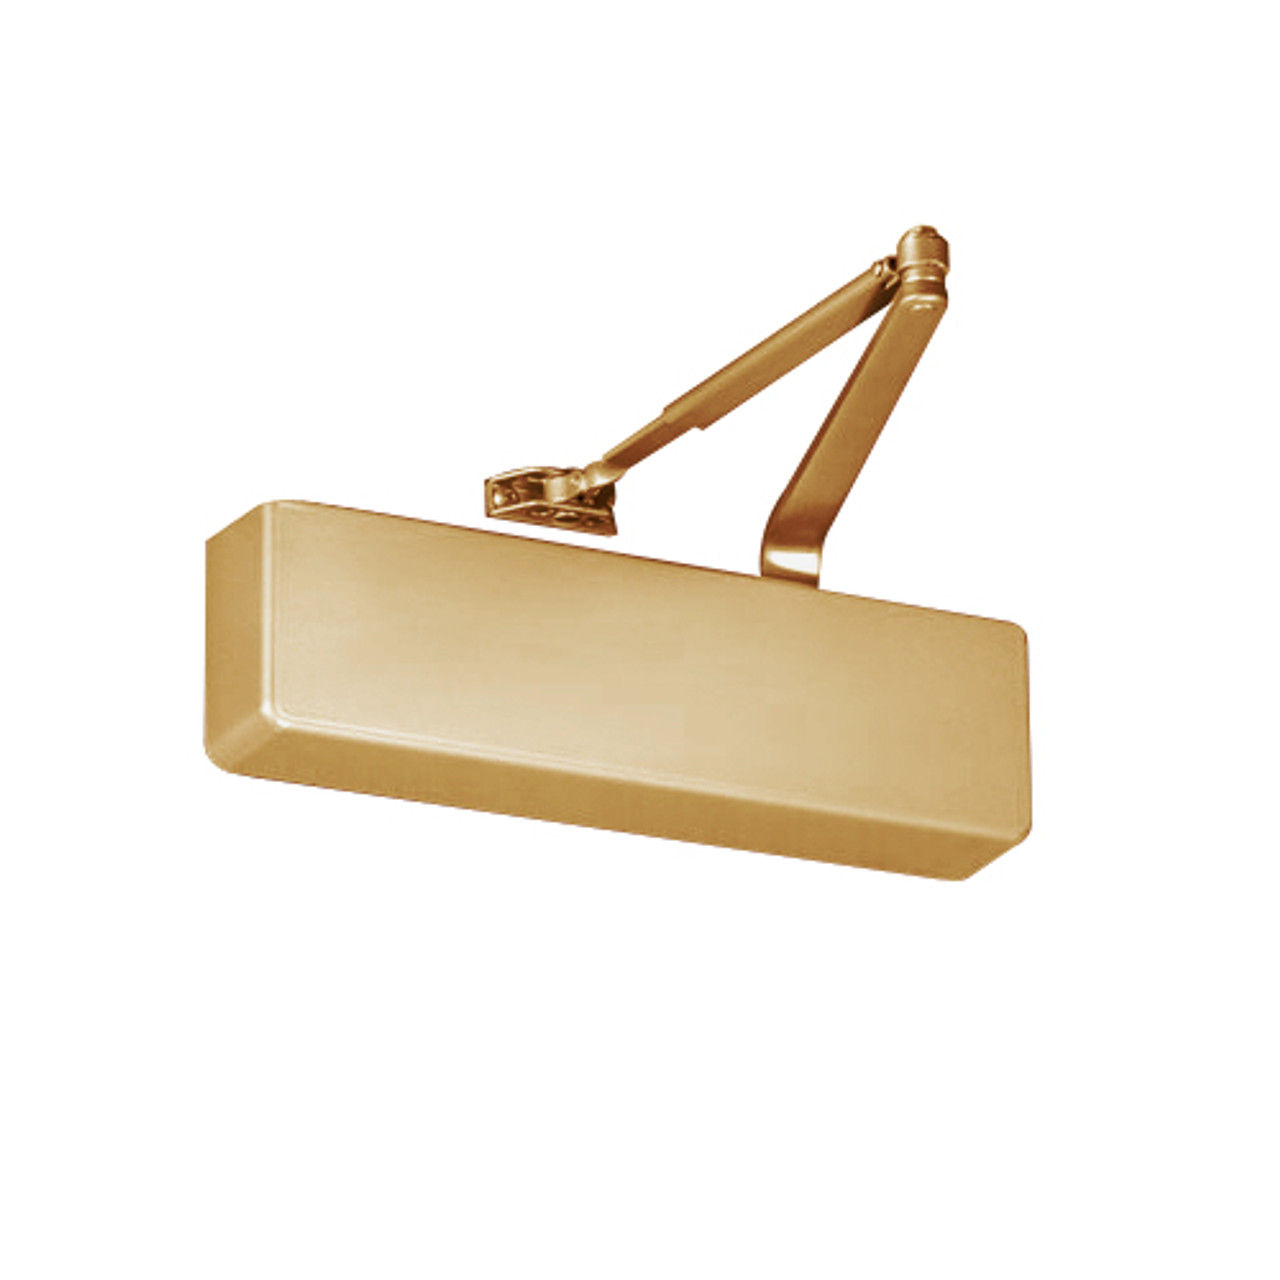 S7500M-691 Norton 7500 Series Non-Hold Open Institutional Door Closer with Regular Arm Application Only in Dull Bronze Finish